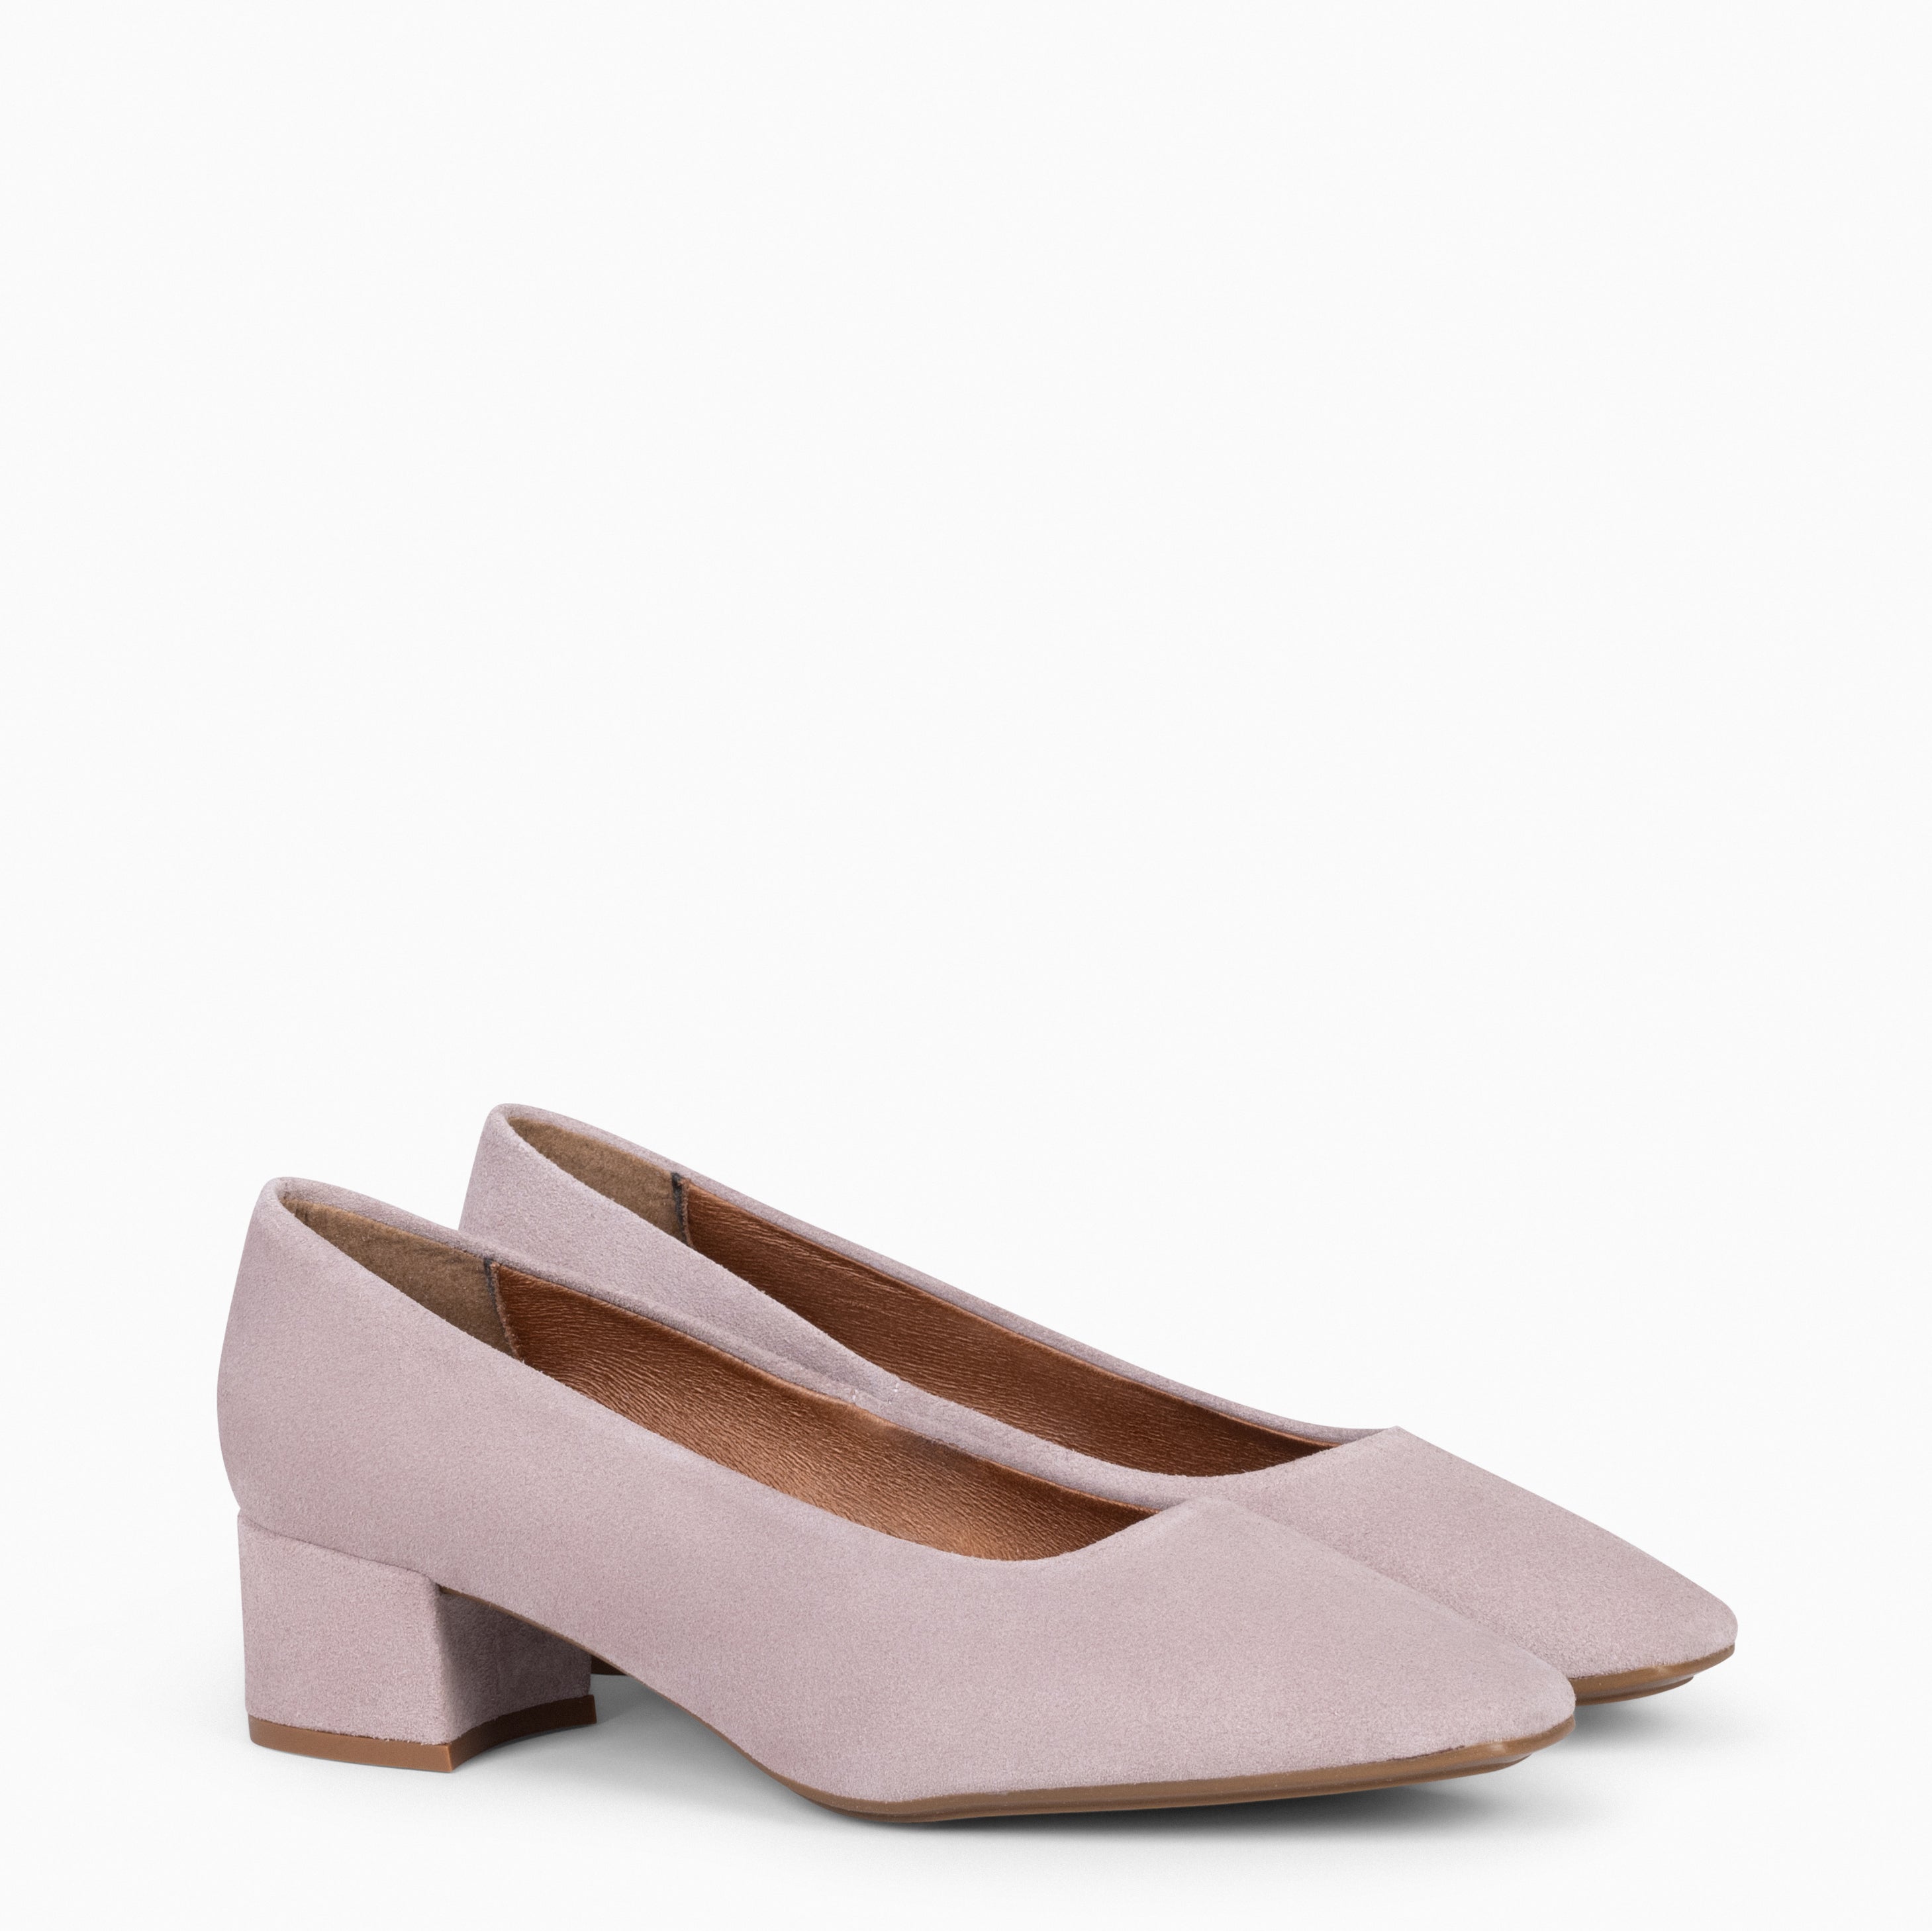 URBAN LADY – NUDE suede leather low heels 